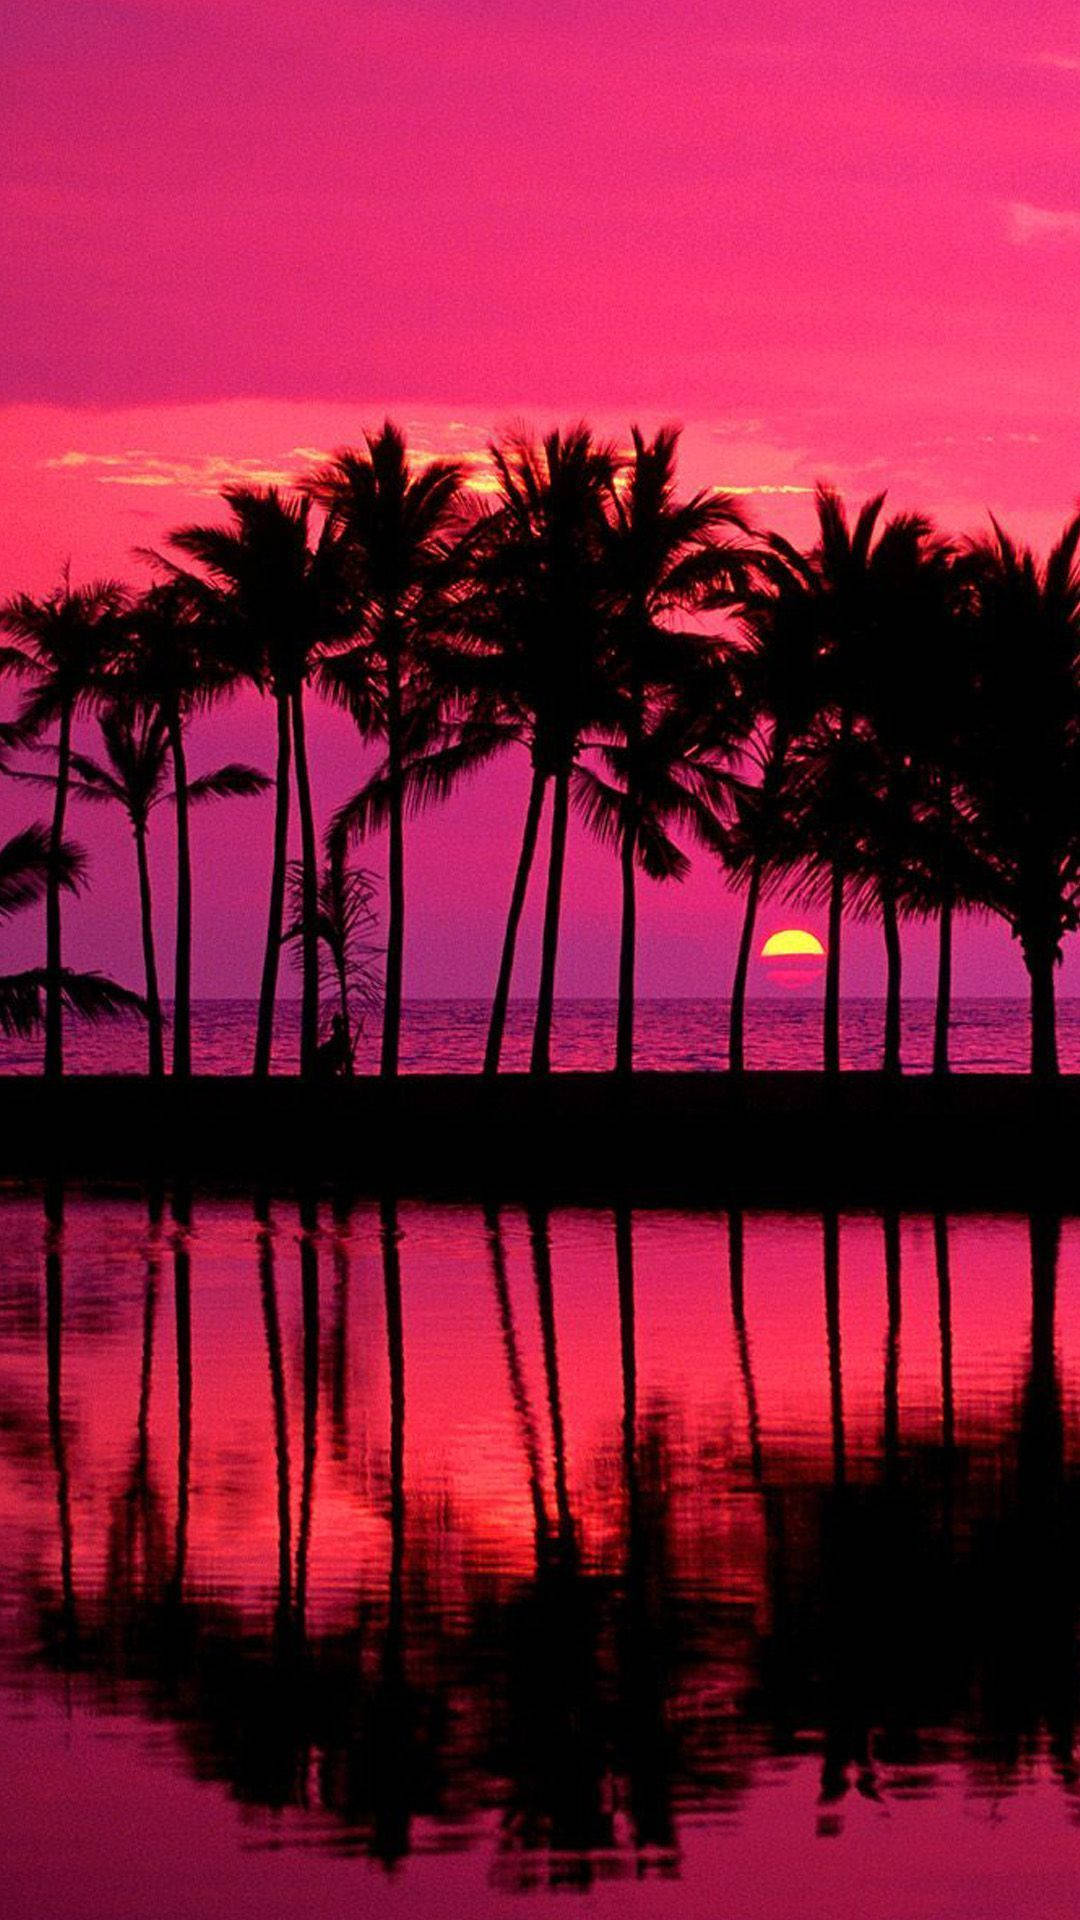 Captivating Pink Sunset Amidst Palm Trees Wallpaper